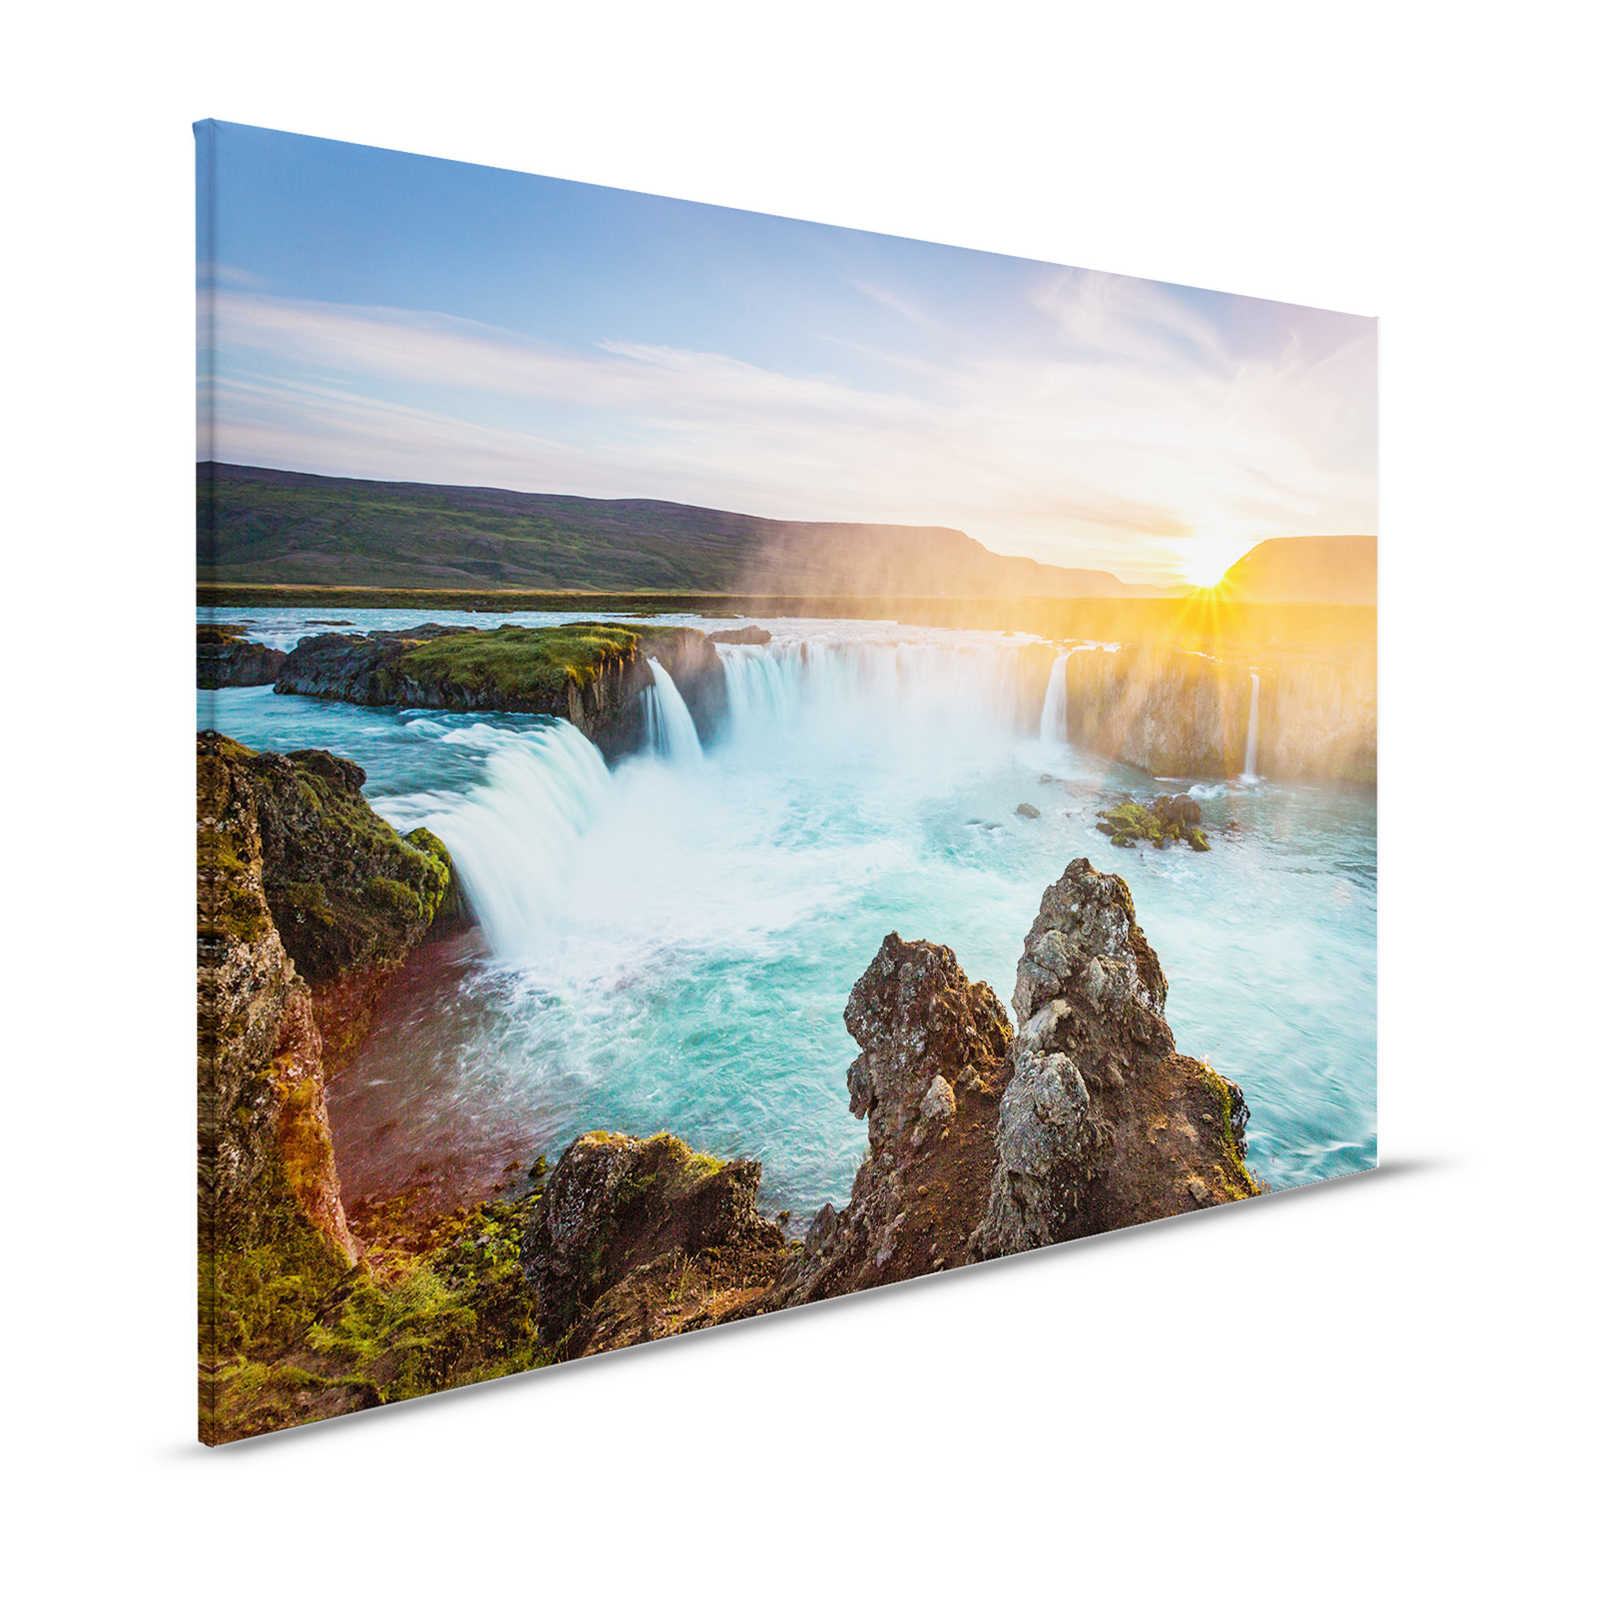 Godafoss Iceland - Canvas painting with waterfall panorama - 1.20 m x 0.80 m
